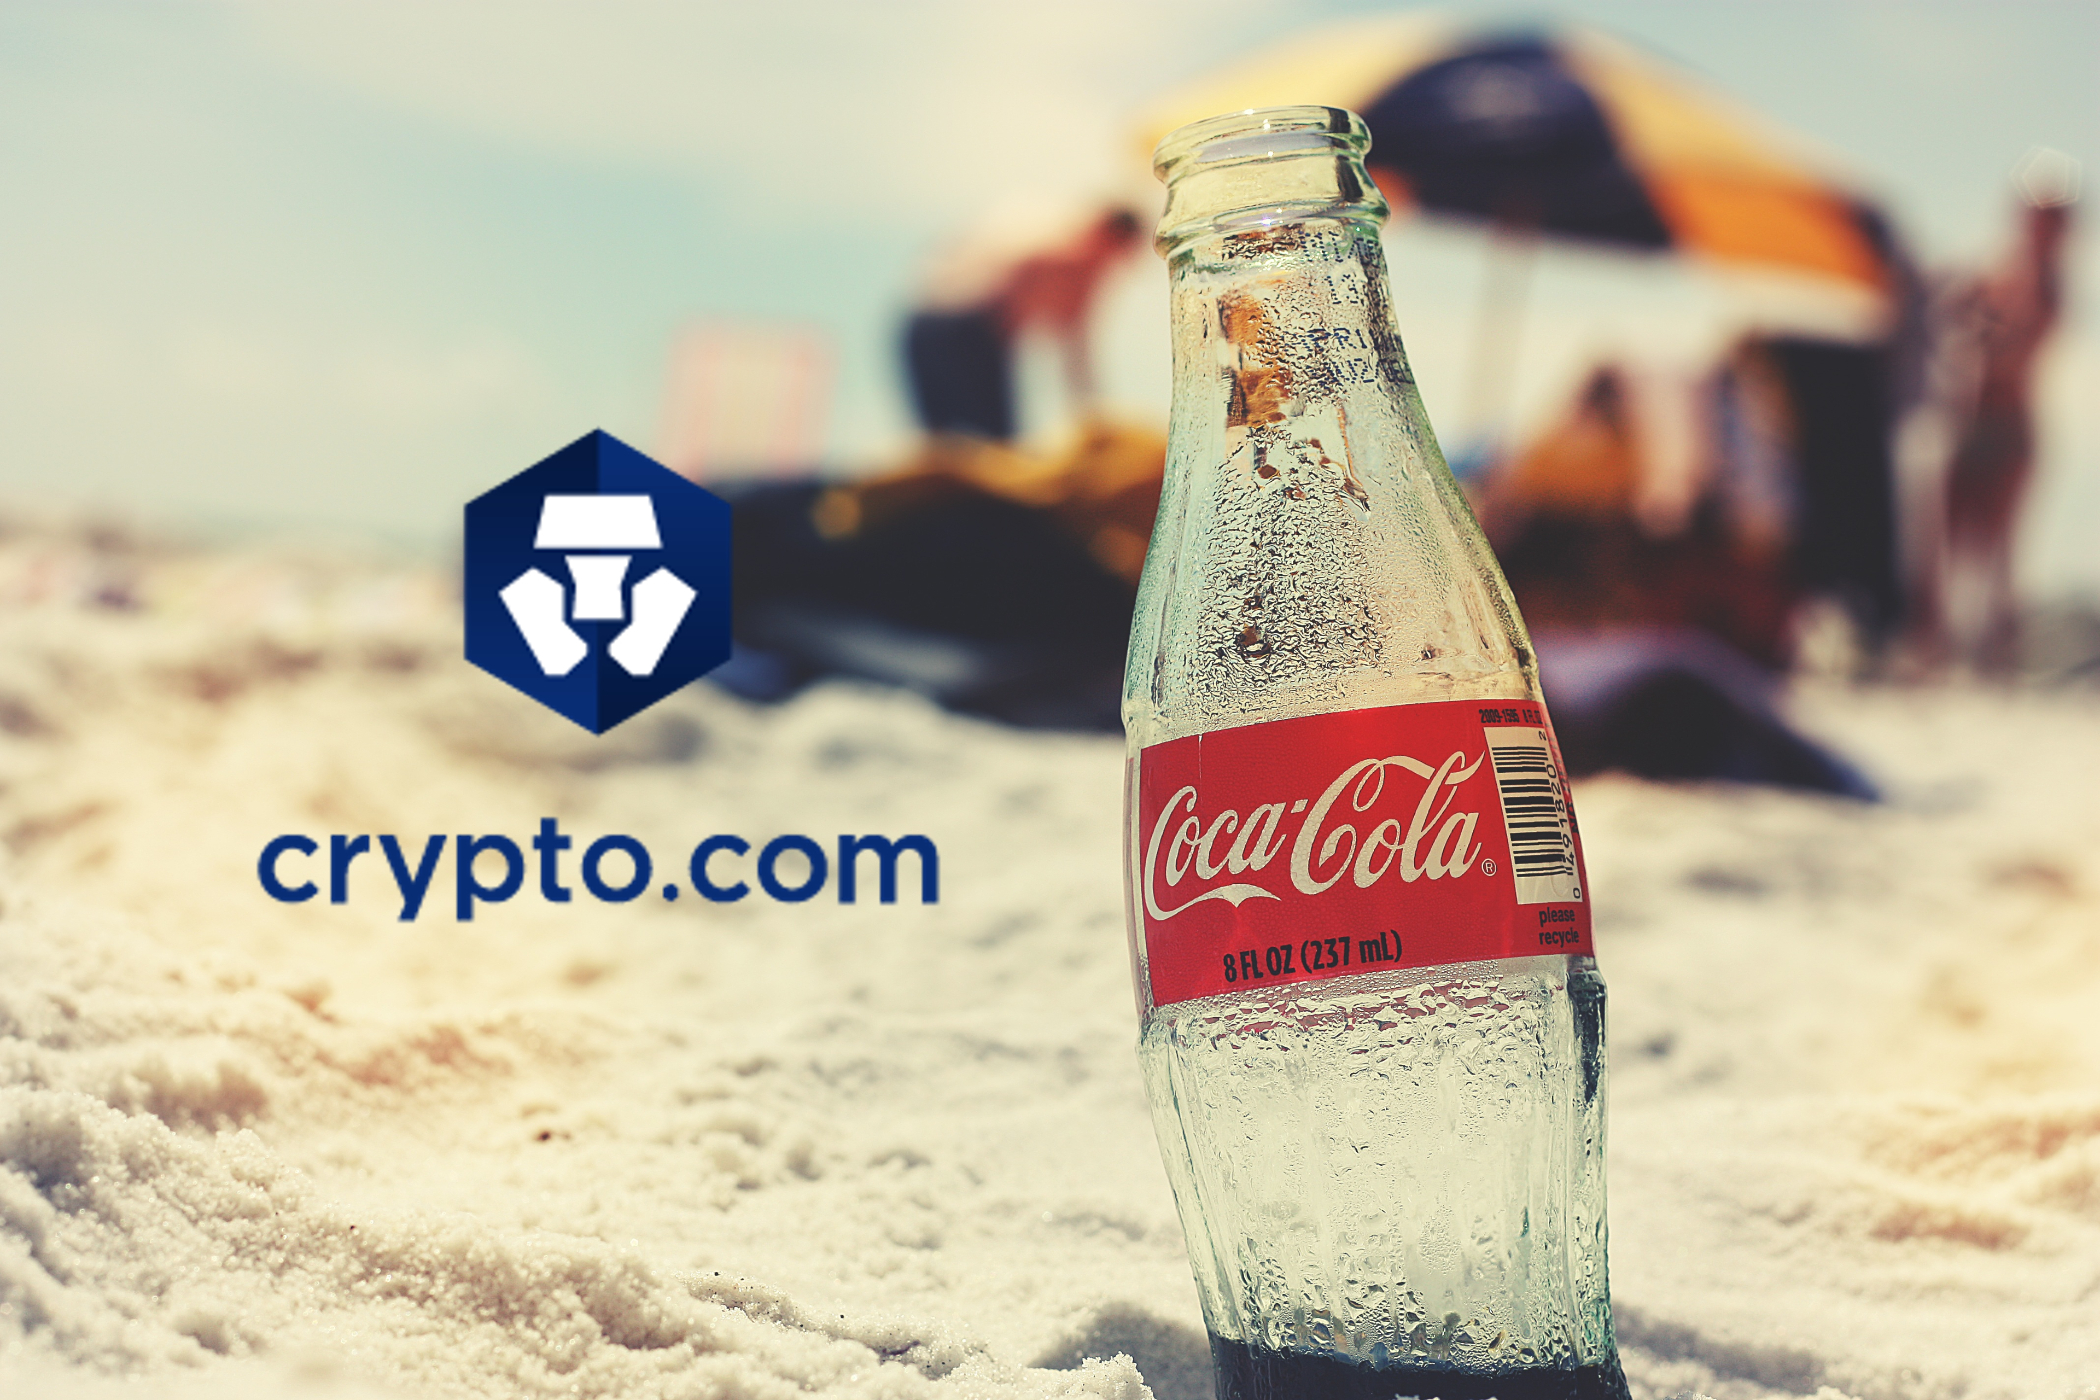 CRO price spiked on news of Coca-Cola partnering with Crypto.com, but pared gains later in the day.